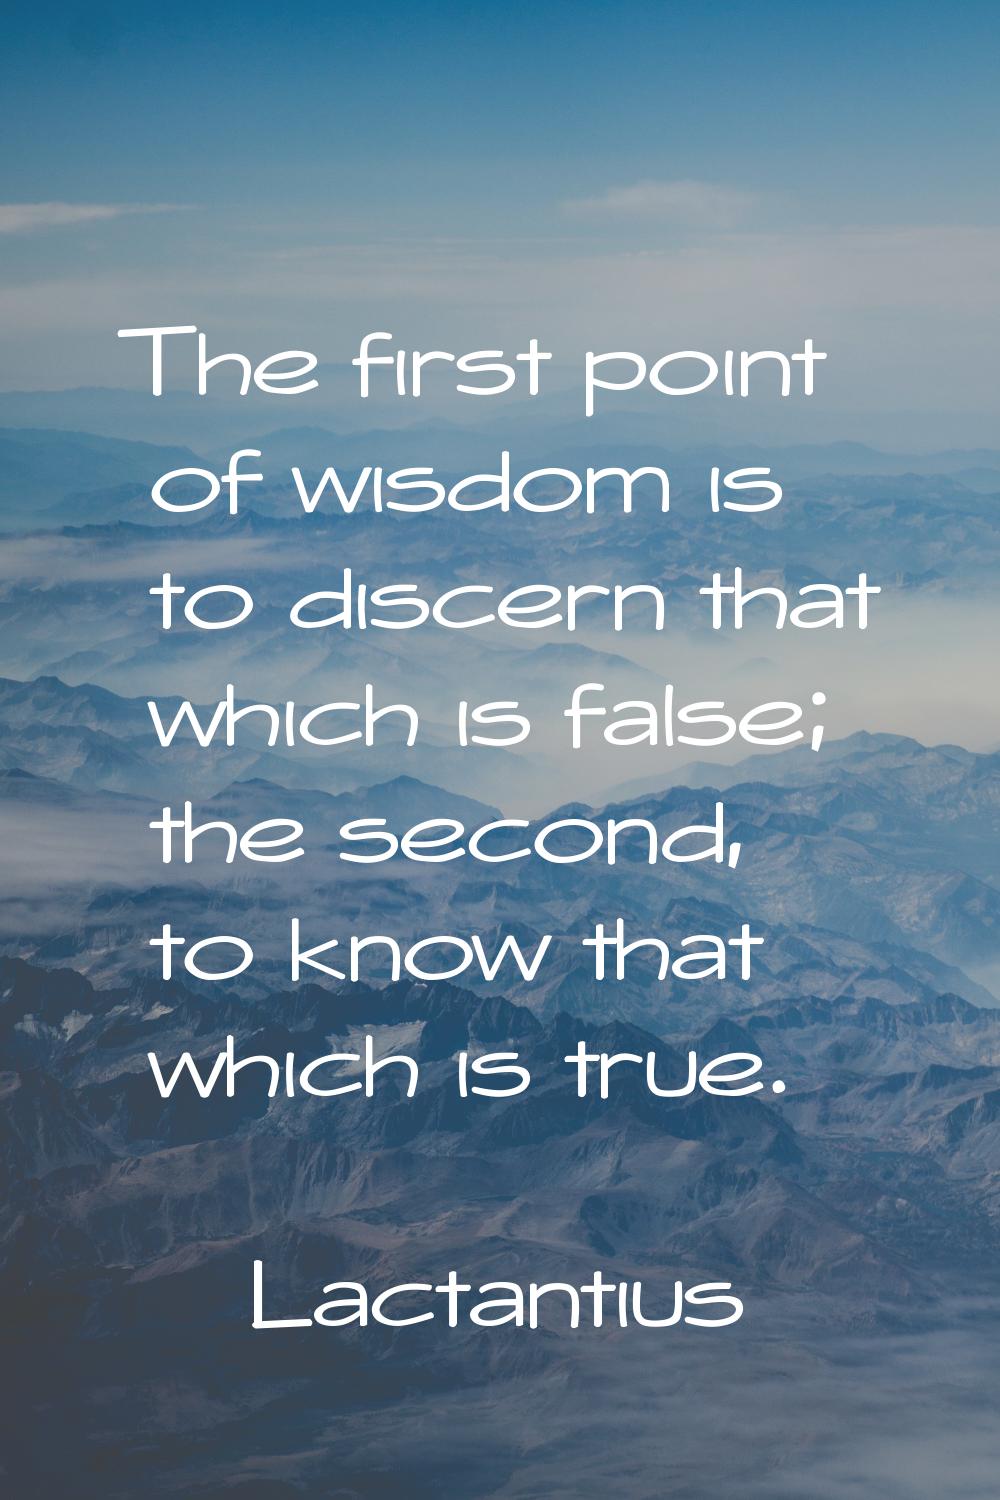 The first point of wisdom is to discern that which is false; the second, to know that which is true